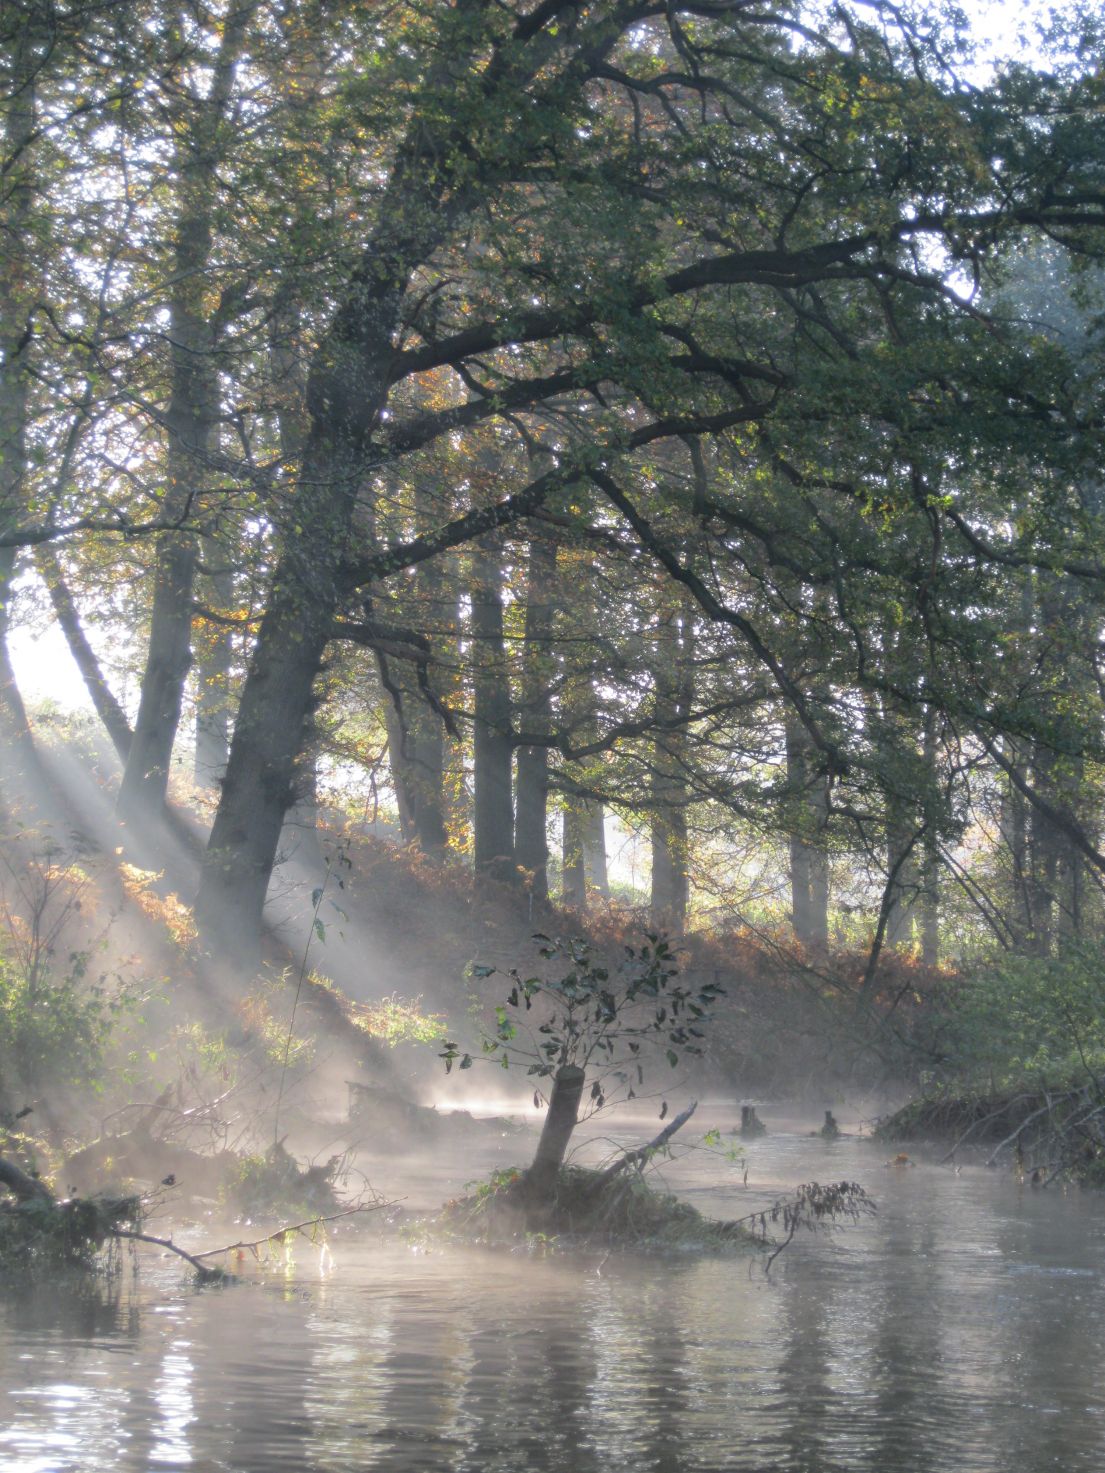 A picture of a river winding though a wooded area, the sunlight specking through the branches highlighting the mist above the water.